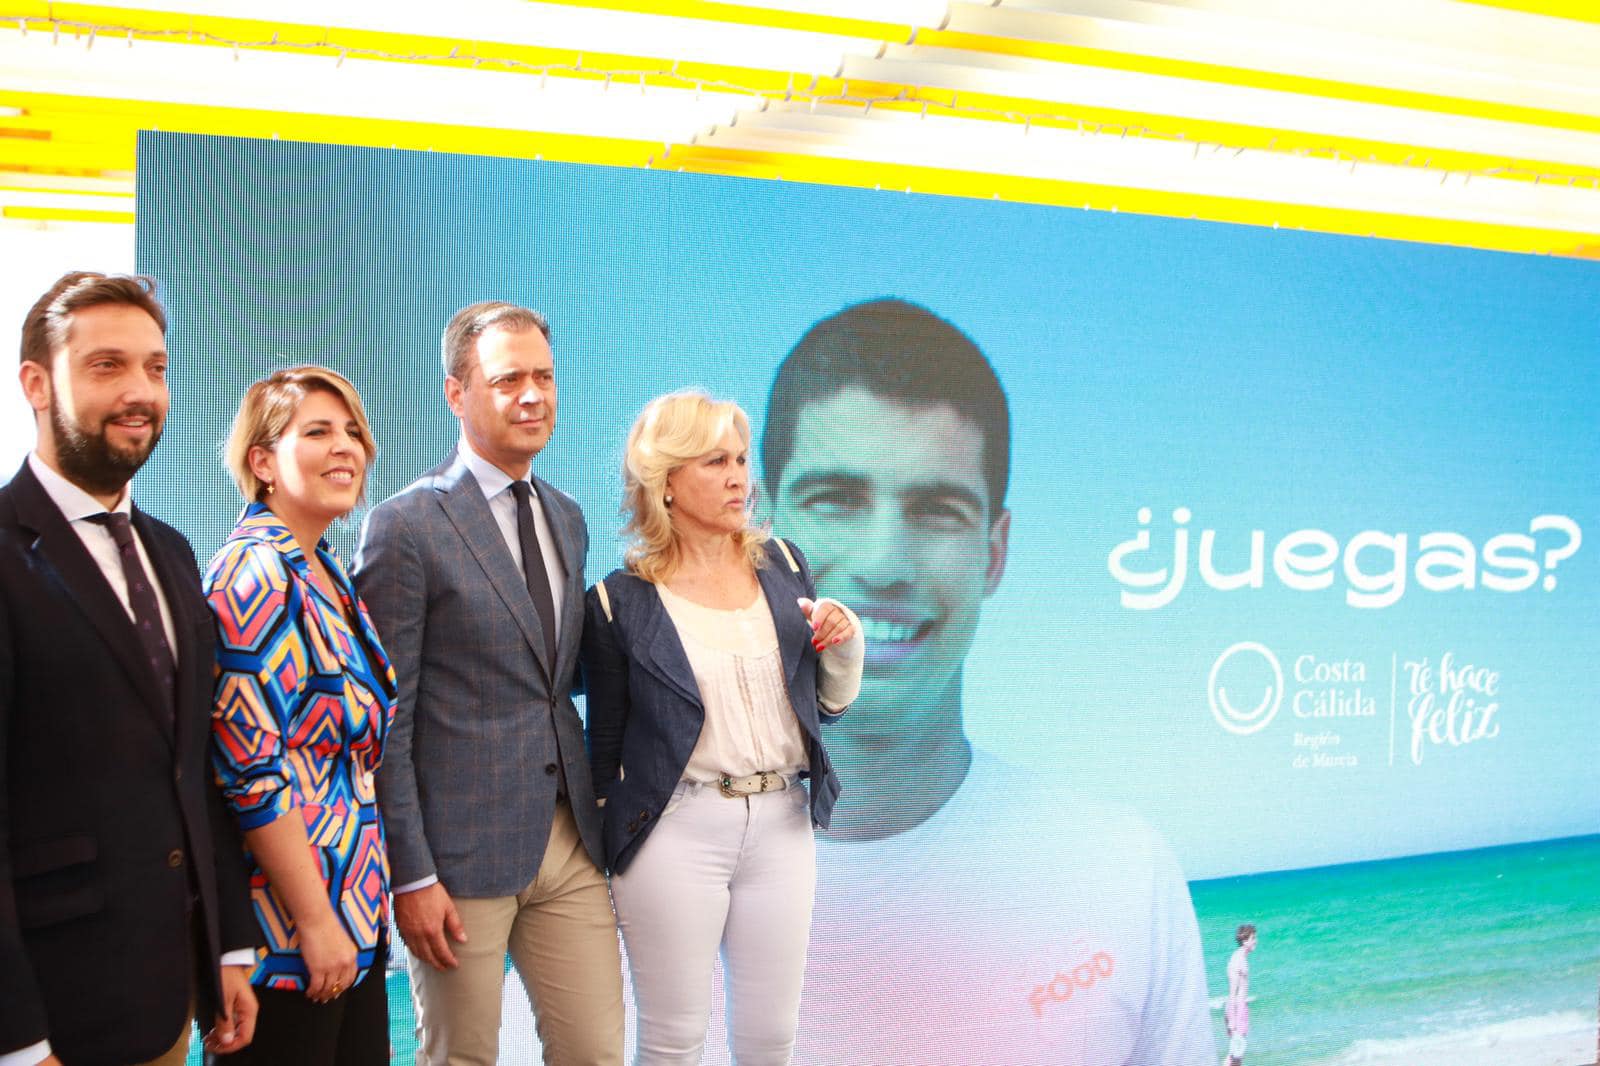 Tennis Sensation Carlos Alcaraz Stars In New Video Promoting His Home Murcia Region To Tourists In Spain